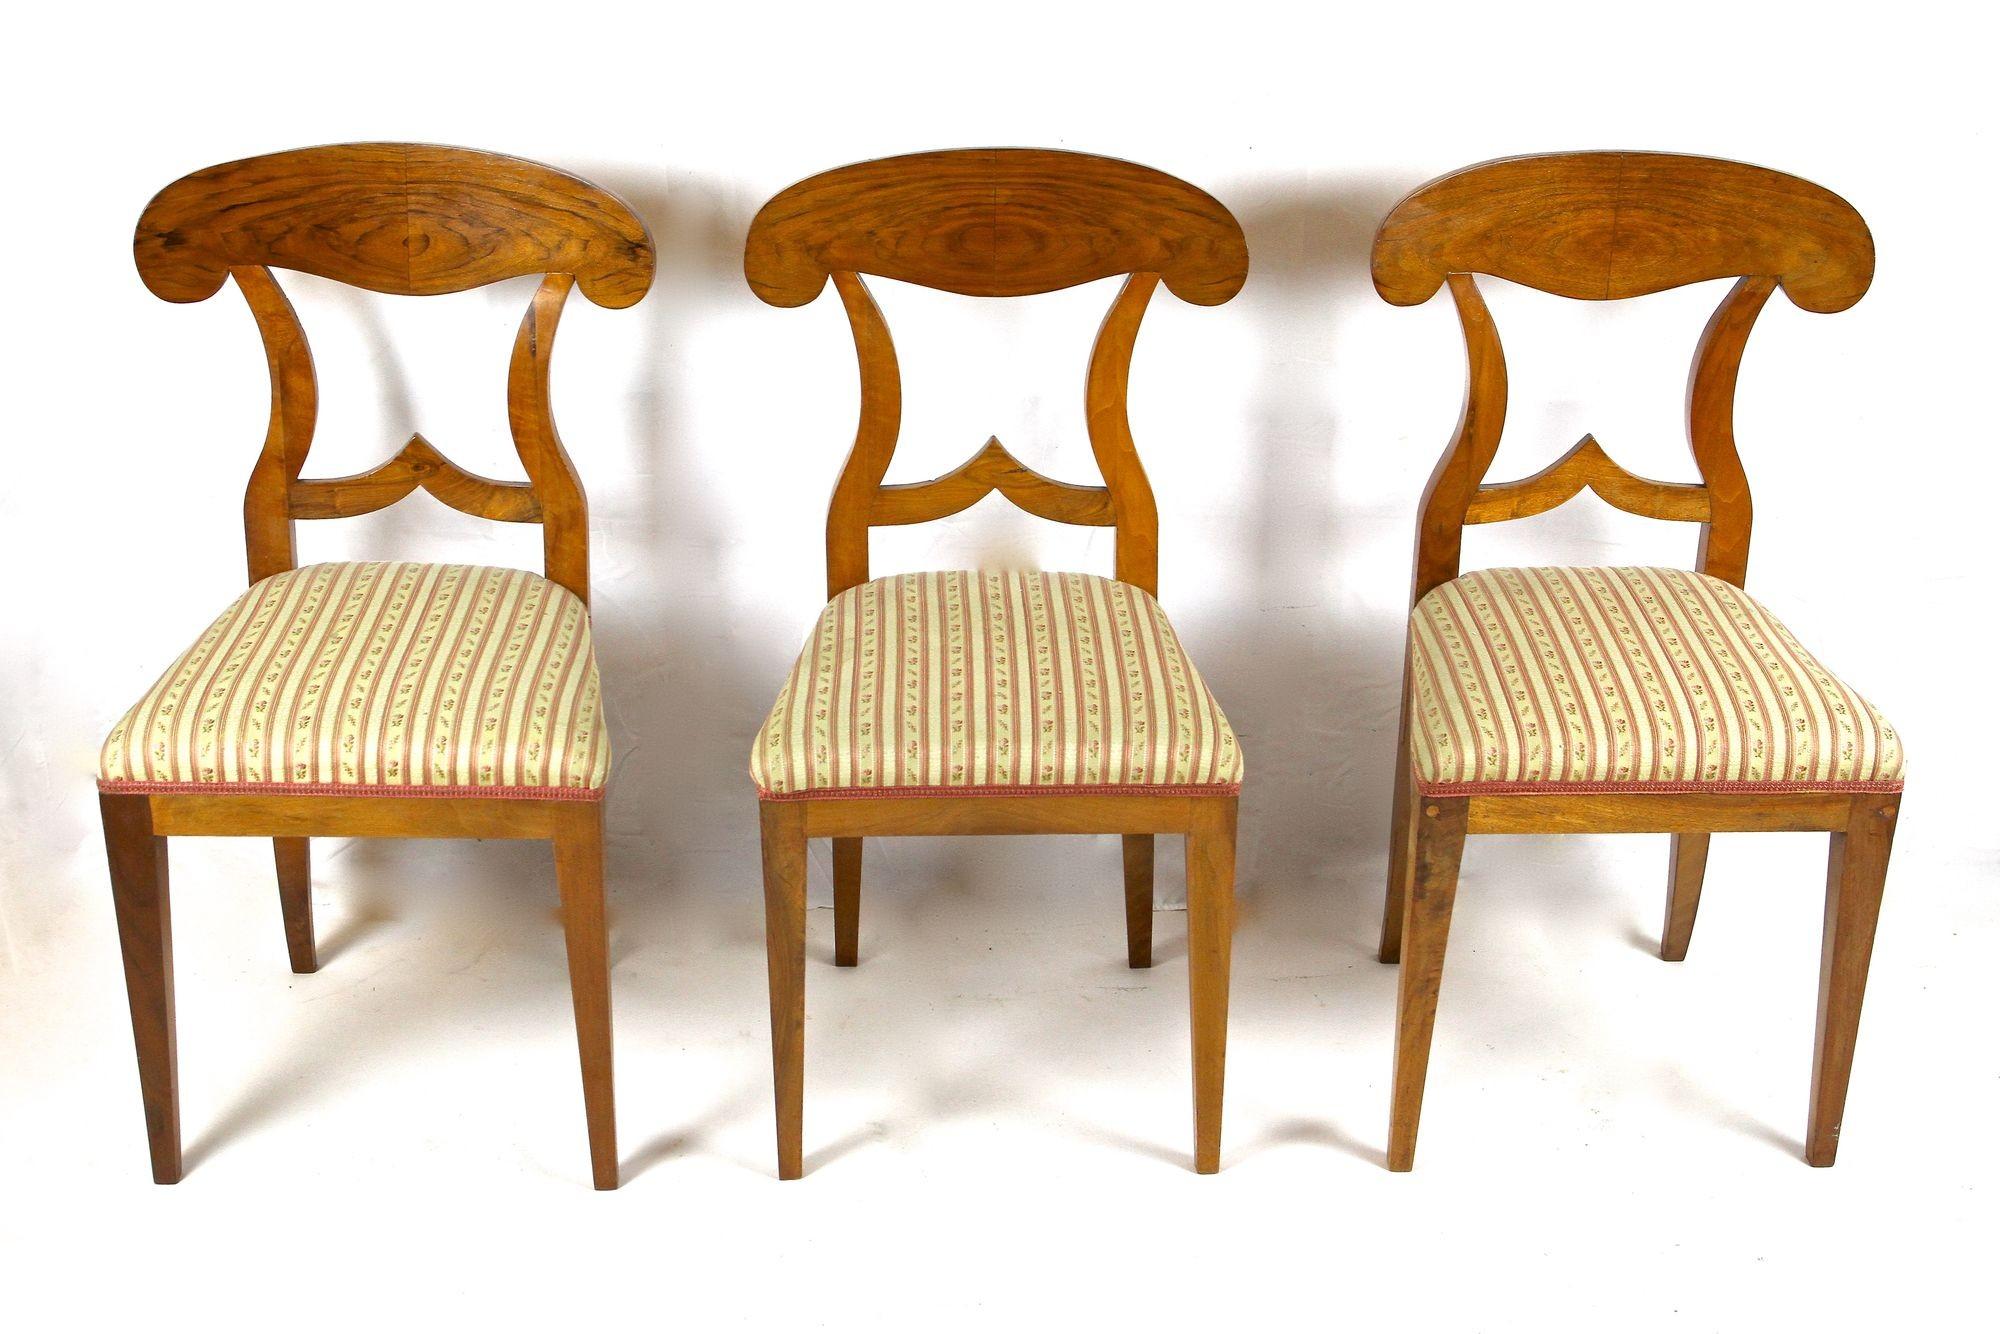 Polished Set Of 6 Biedermeier Nutwood Shovel Dining Chairs, 19th Century, AT ca. 1830 For Sale